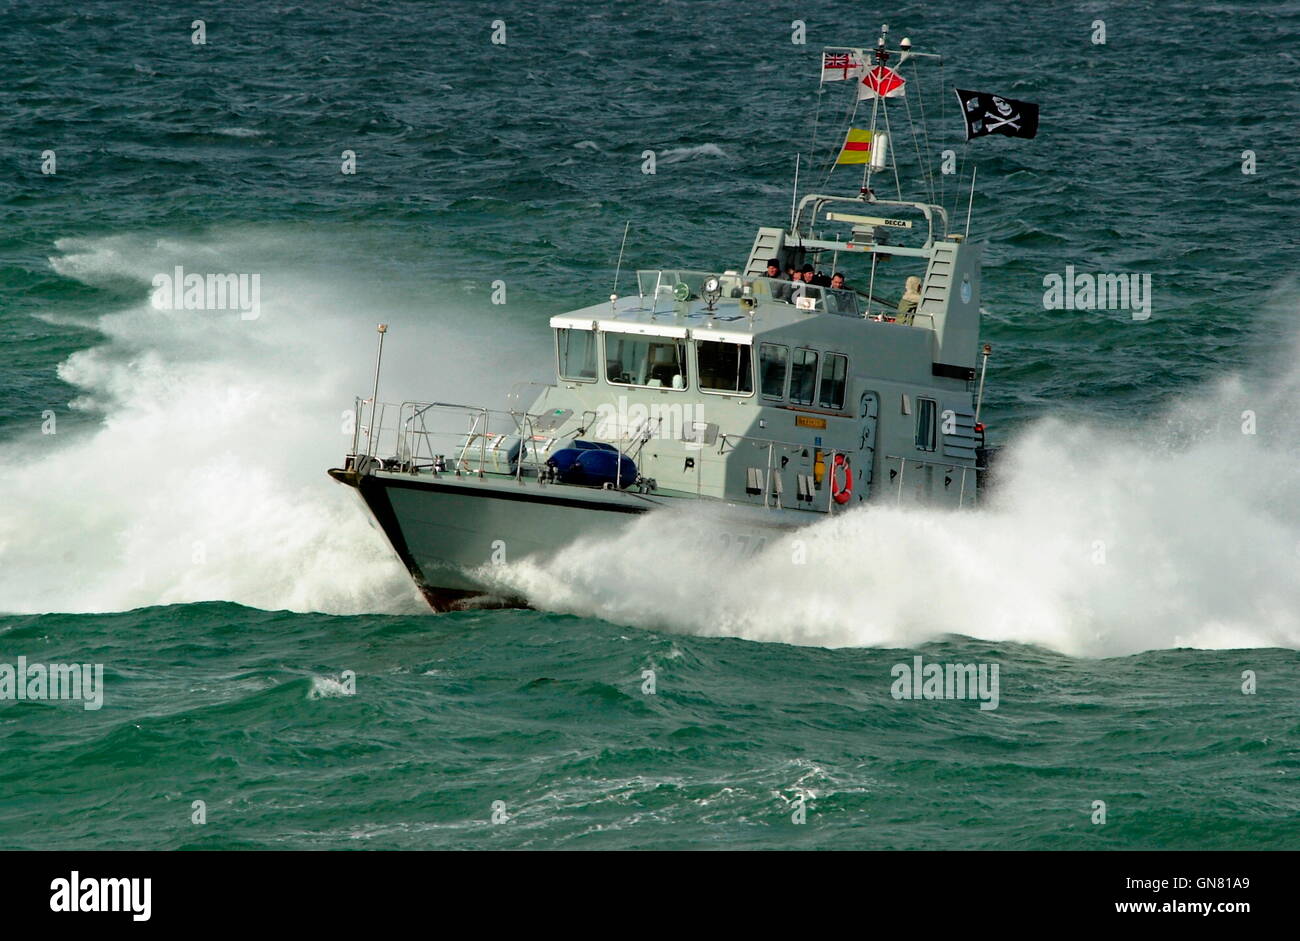 AJAXNETPHOTO. 5TH OCT, 2004. AT SEA, CHANNEL. - STAFF COLLEGE SEA DAYS P2000 TYPE FAST PATROL BOAT HMS TRACKER PLAYS THE BANDIT, APPROACHING HMS GRAFTON AT SPEED IN MOCK ATTACK..  PHOTO:JONATHAN EASTLAND/AJAX.  REF: 40510 1011. Stock Photo